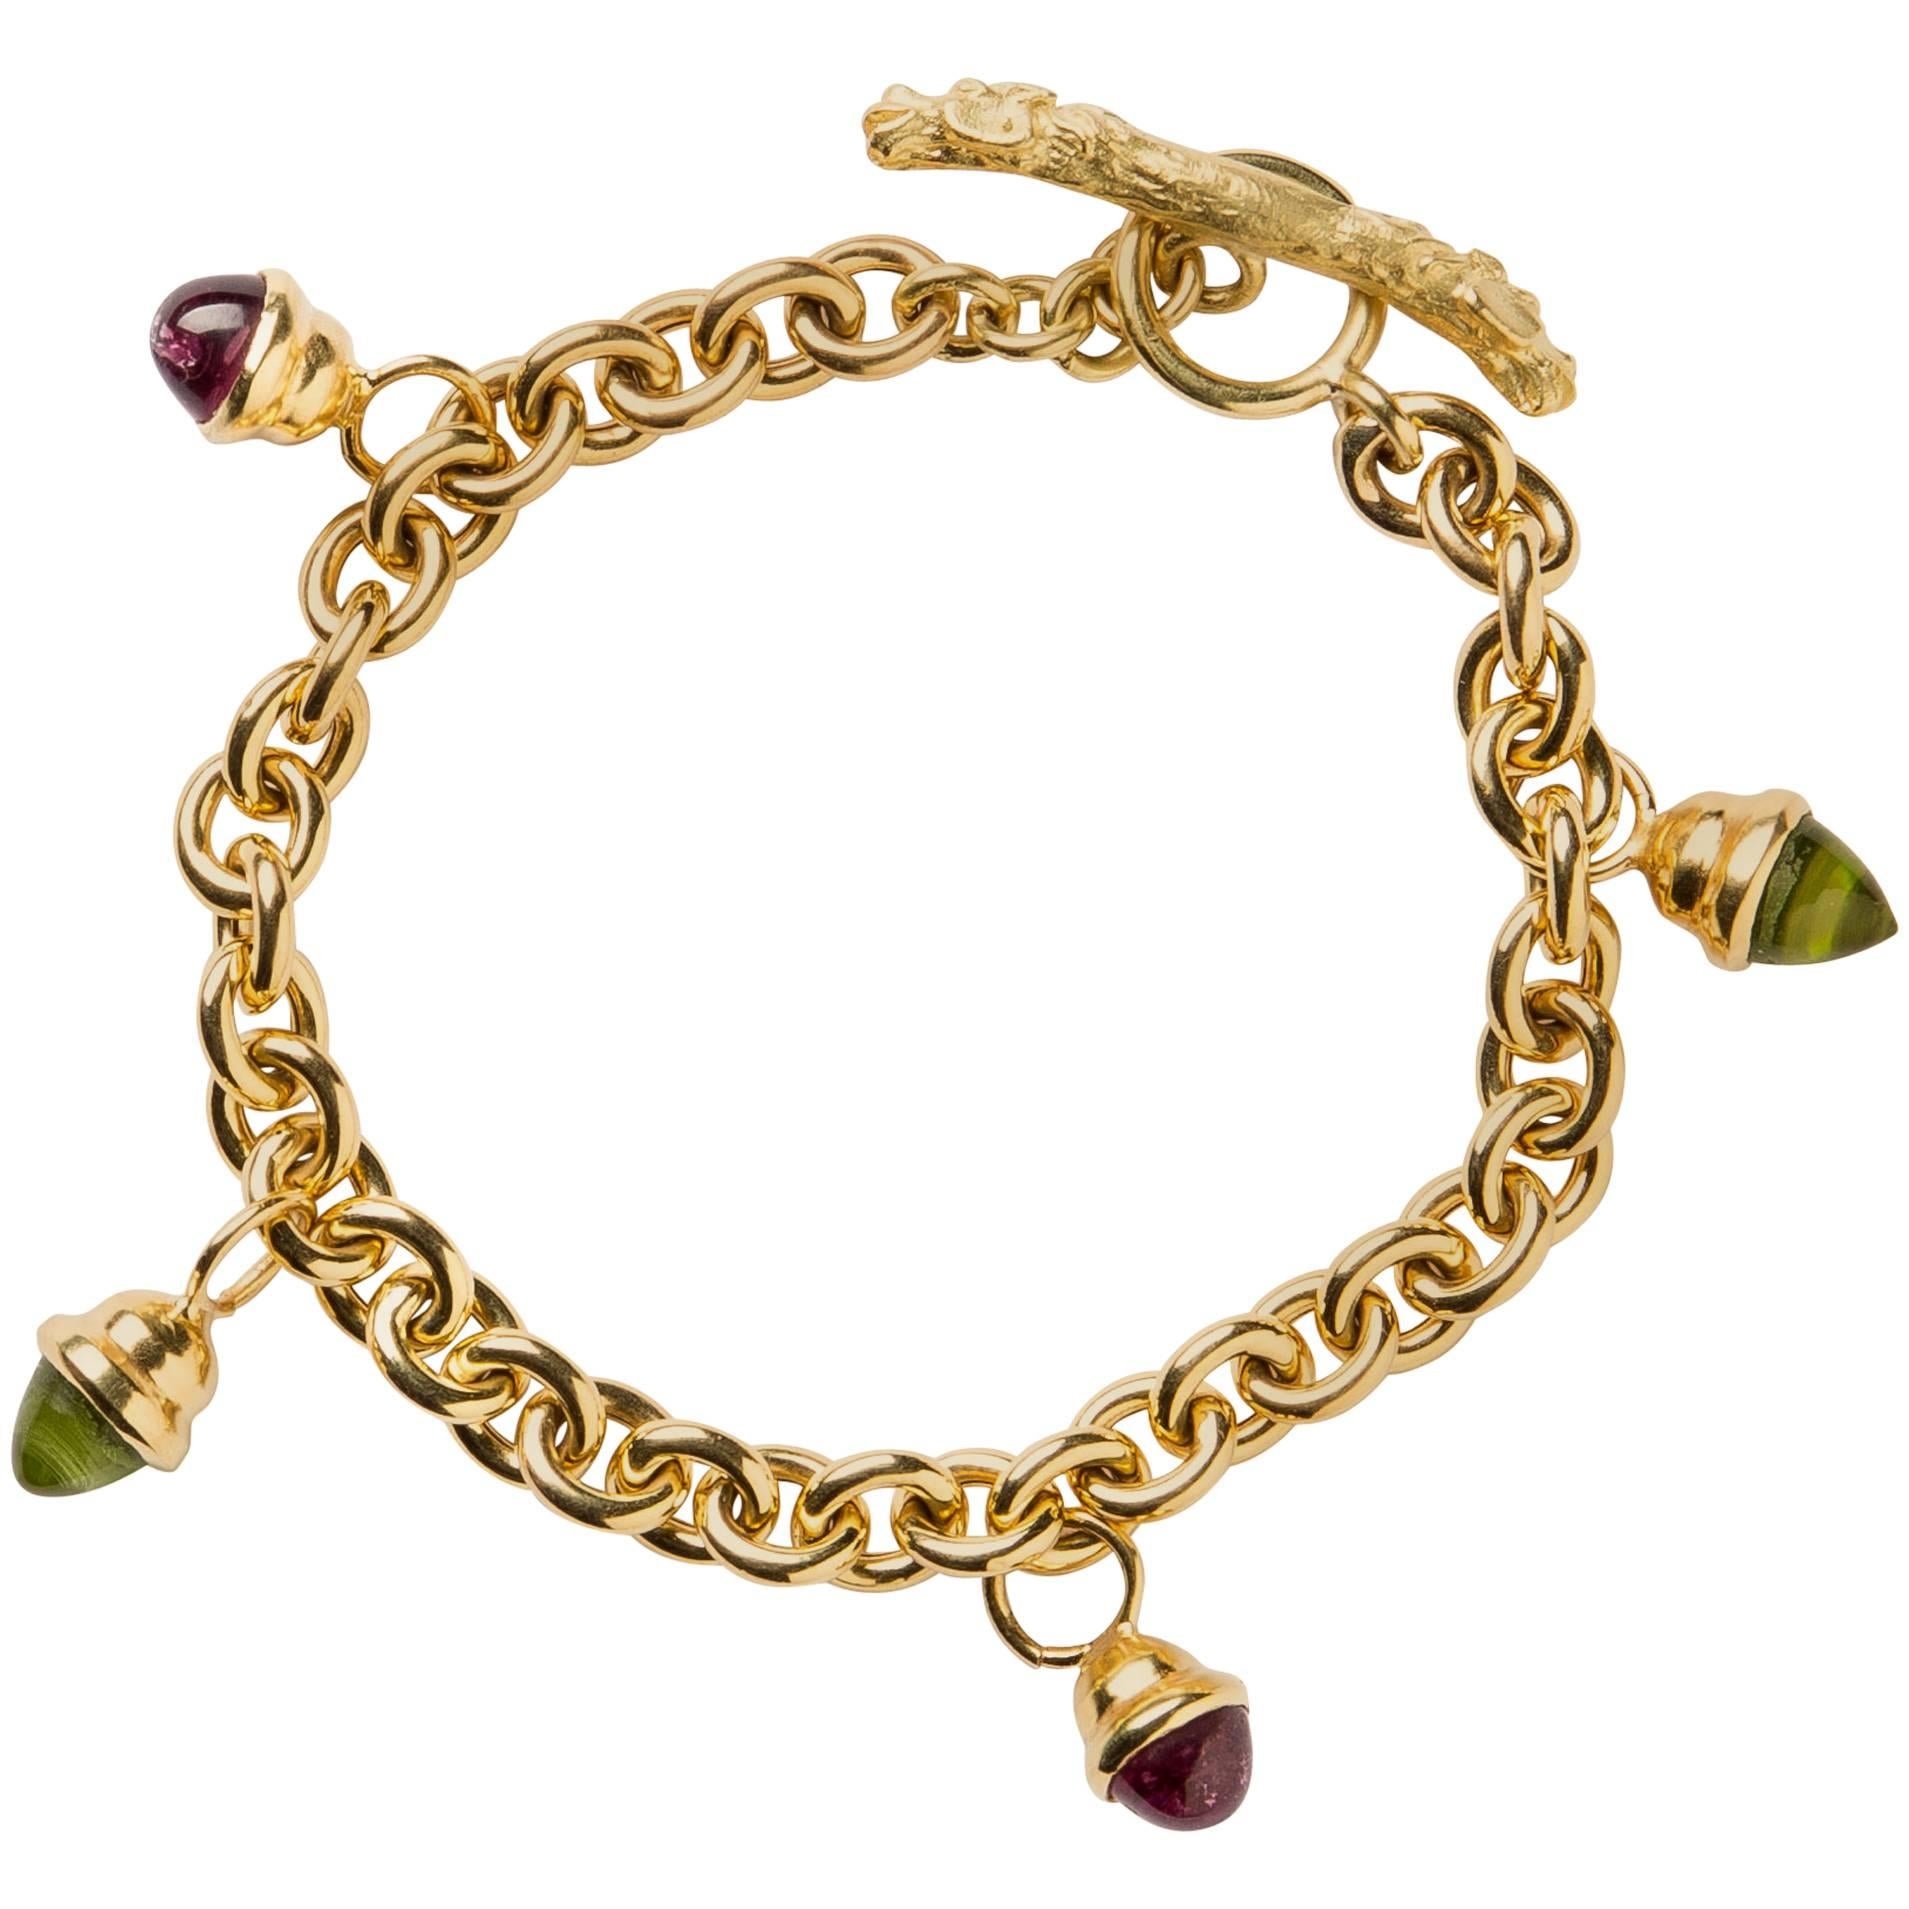 Gold Rolo and Cabochon Charm Bracelet